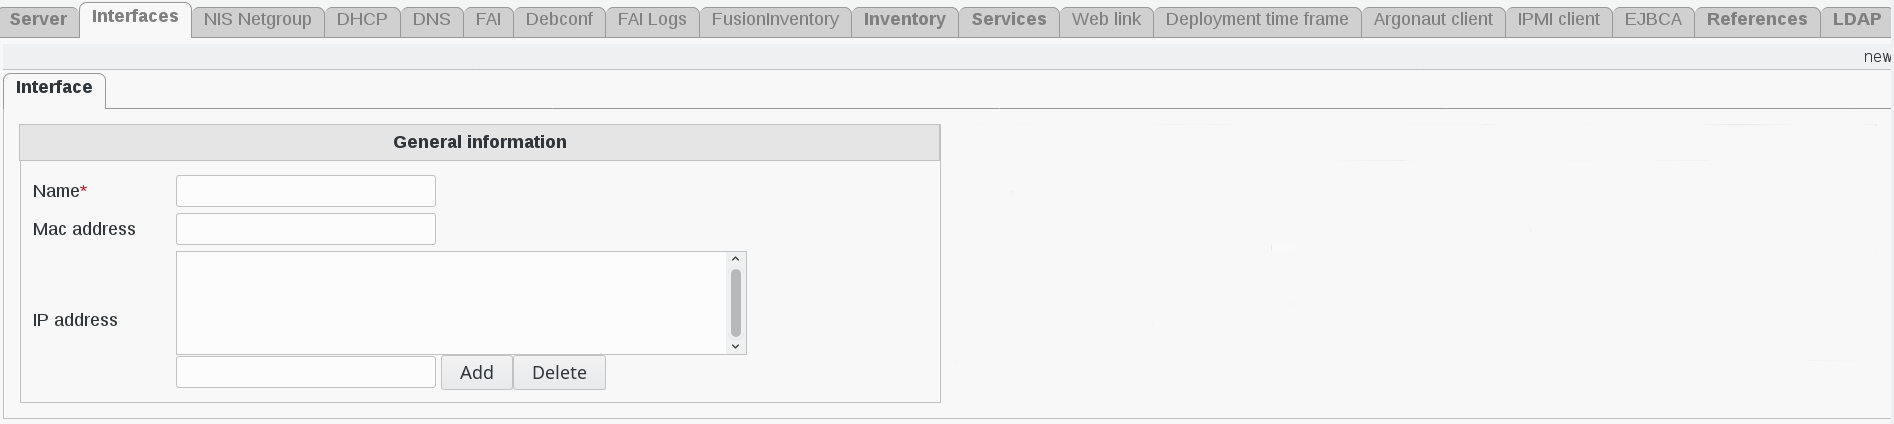 Picture of Interfaces configuration page in FusionDirectory